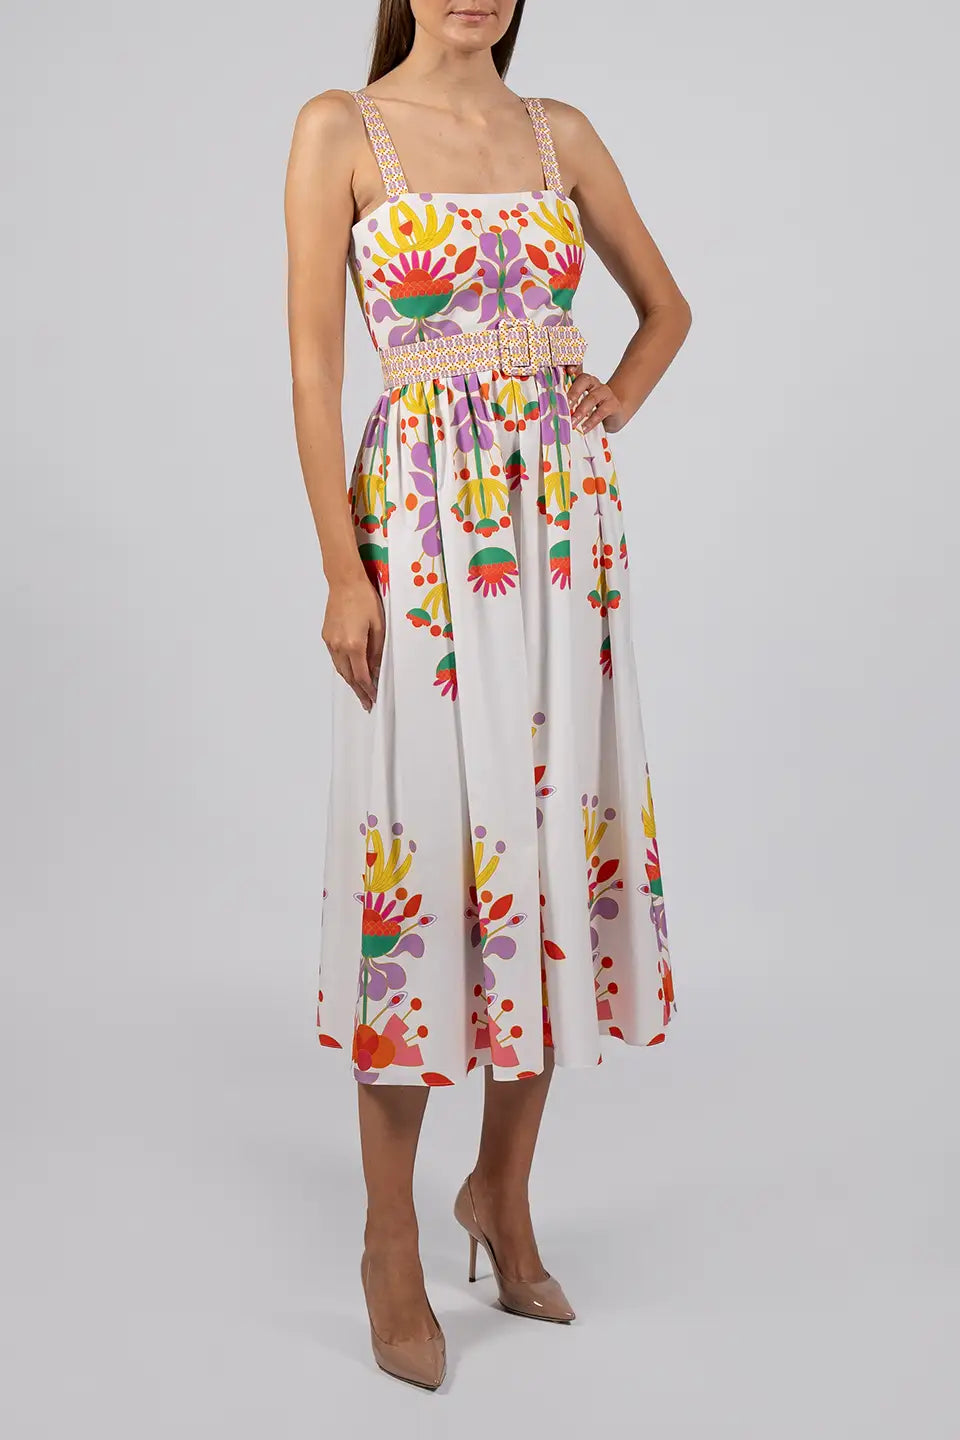 Designer White Midi dresses, shop online with free delivery in UAE. Product gallery 2